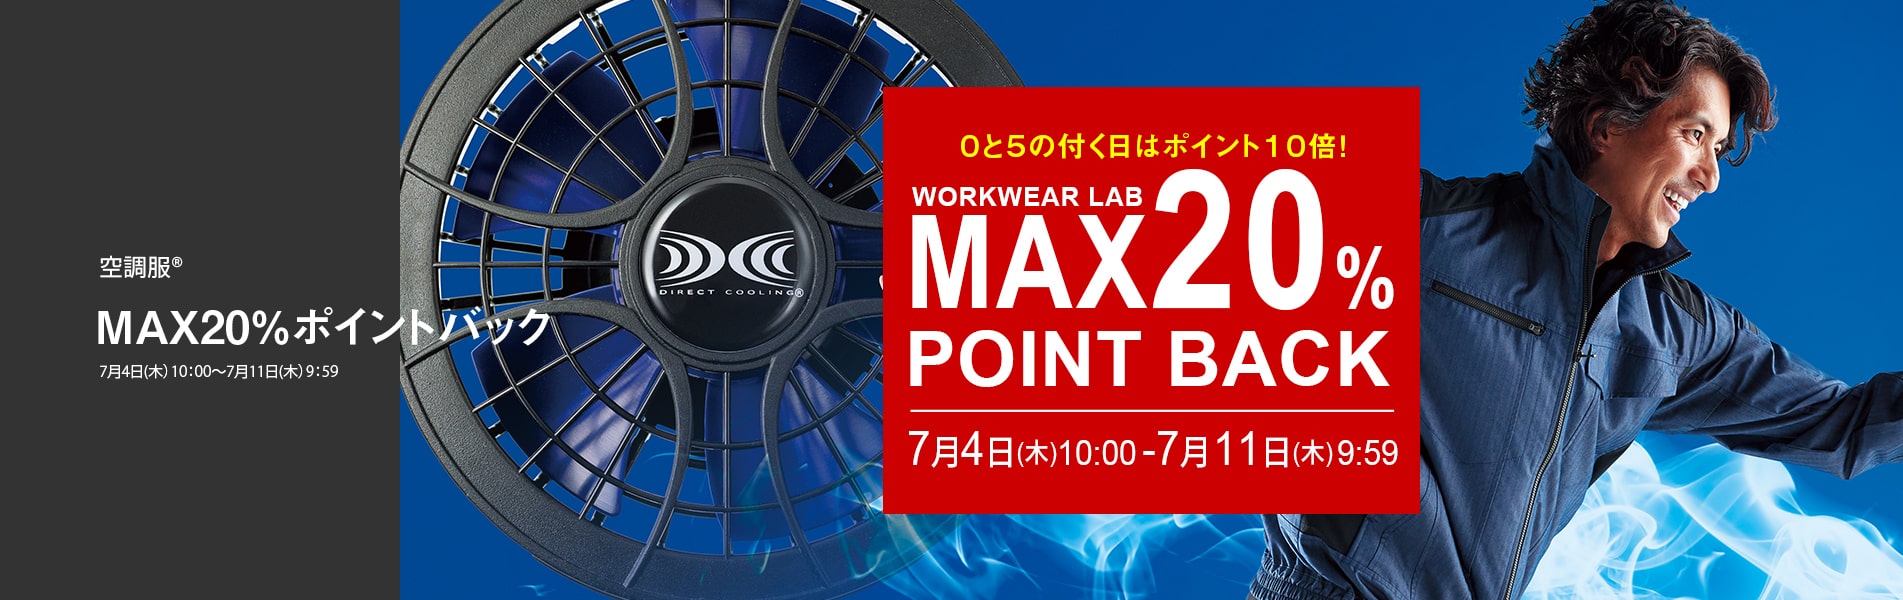 MAX 20%POINT BACK